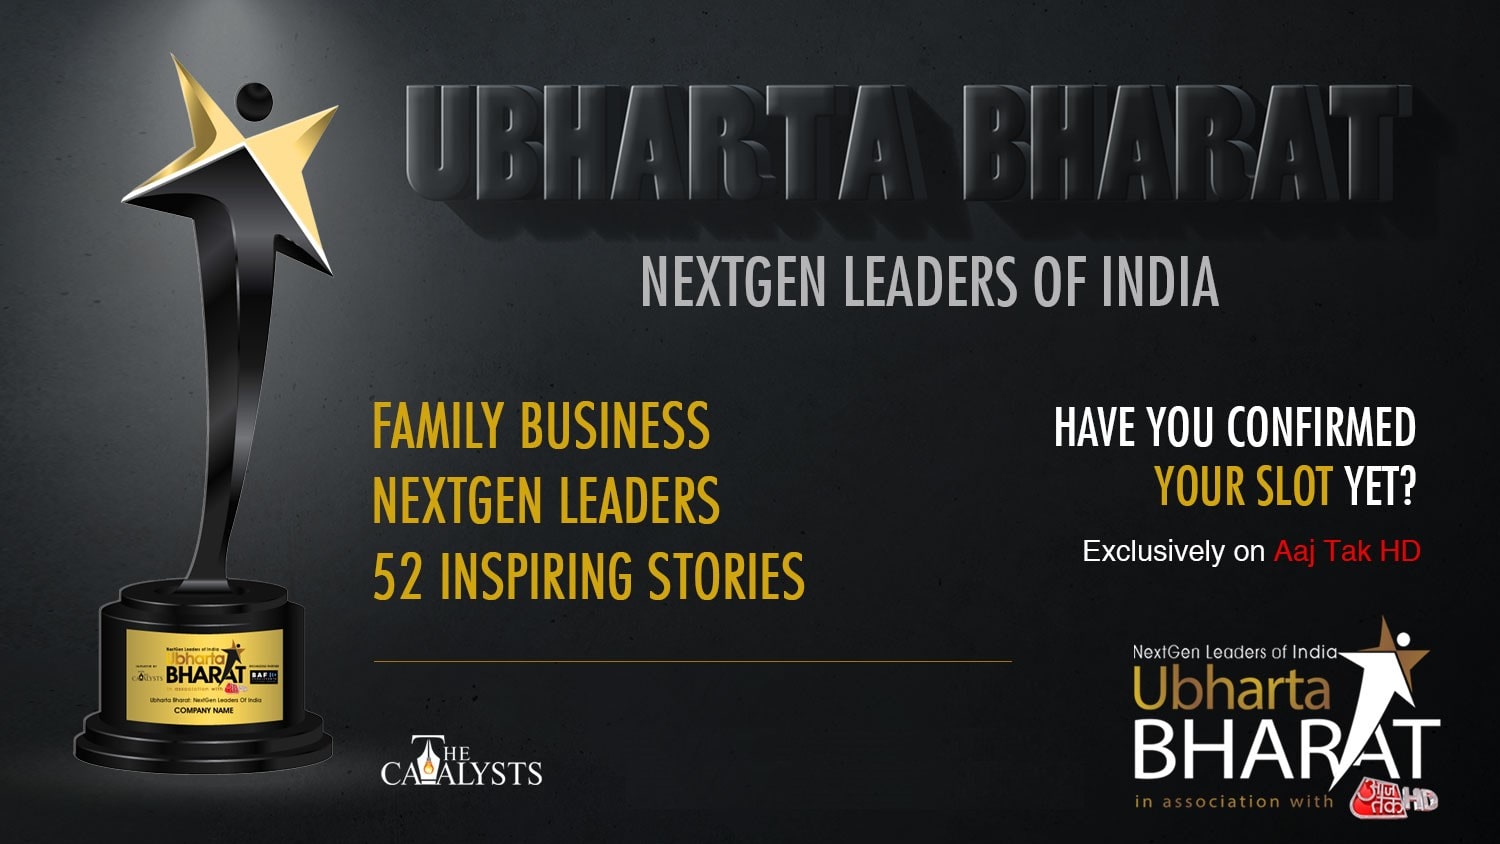 Unfolding the untold stories stories of FAMILY BUSINESS in India and how the NextGen is carrying this Legacy Forward. Exclusively on Aaj Tak HD